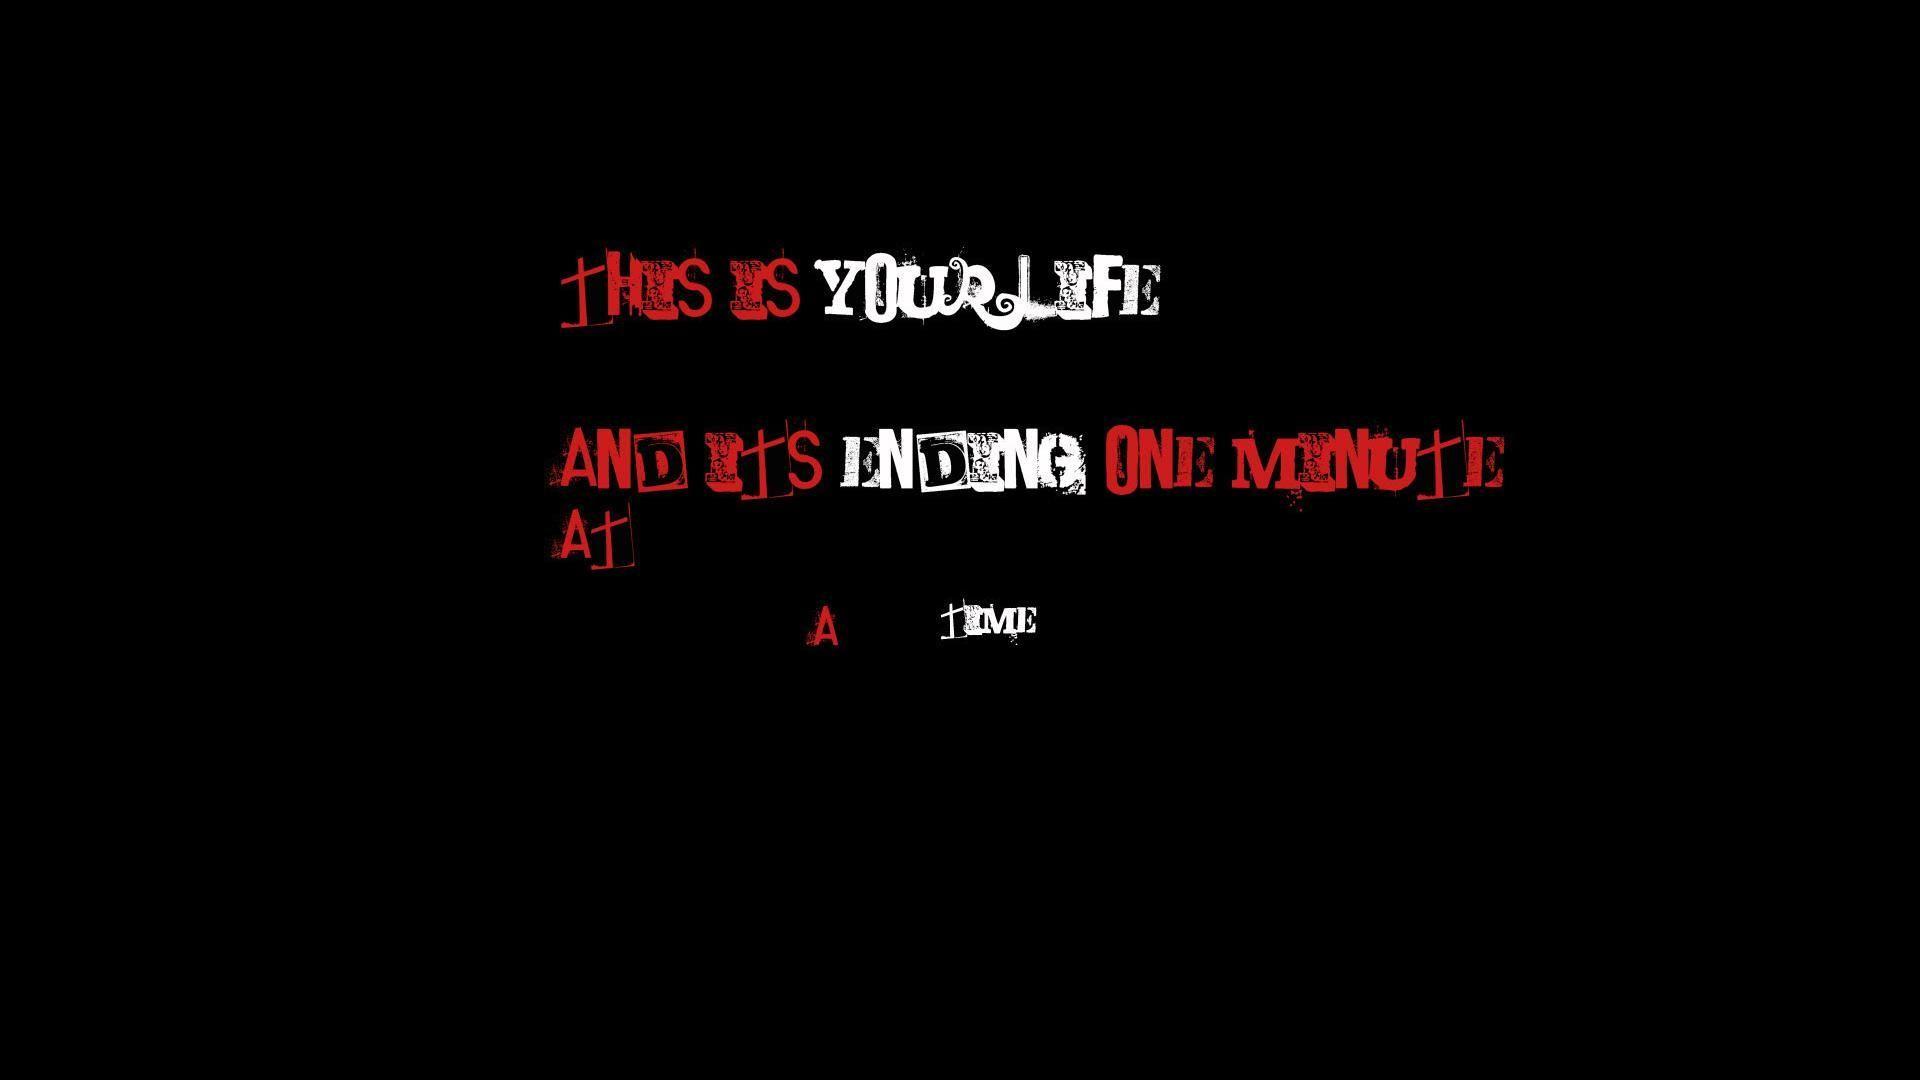 Fight Club Quotes. Quotes Fight Wallpaper 1920x1080 Quotes, Fight